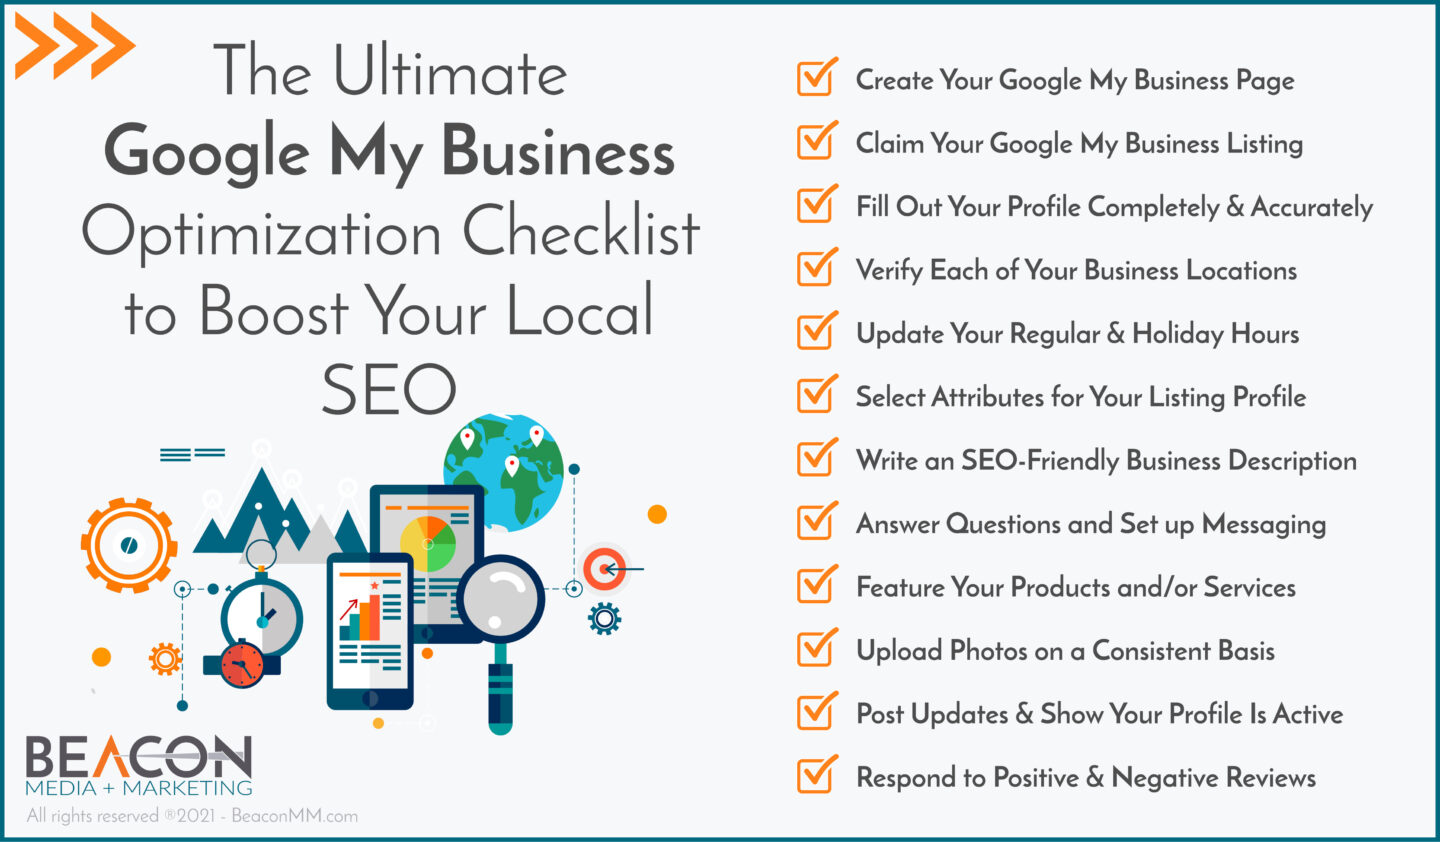 The Ultimate Google My Business Optimization Checklist to Boost Your Local SEO infographic